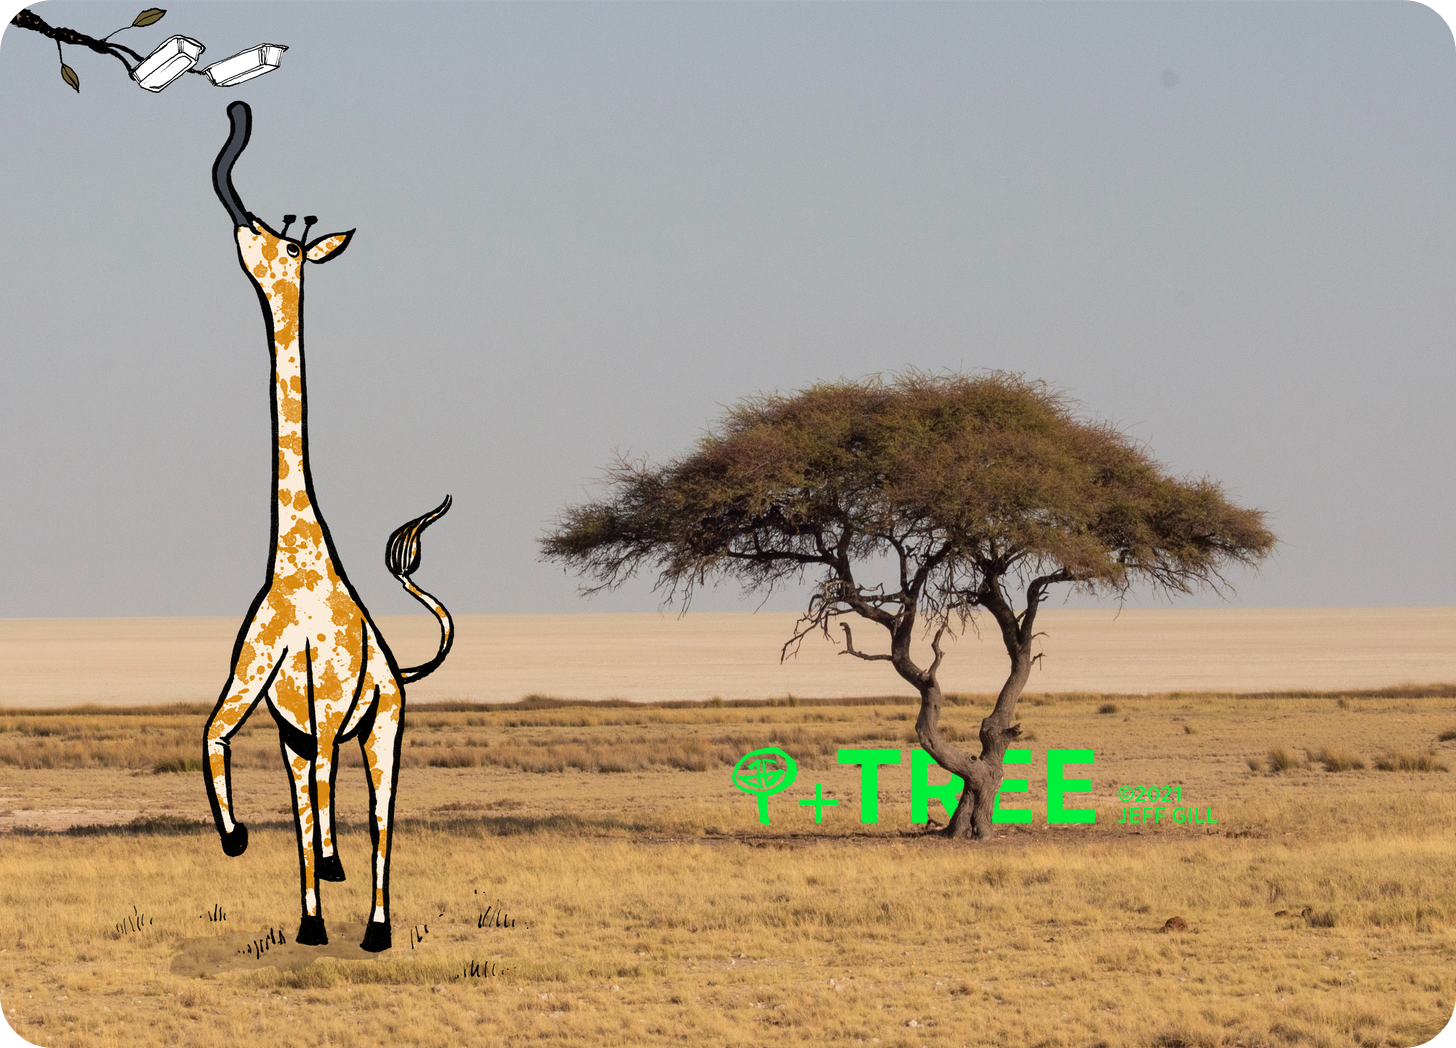 Illustration of a giraffe on its hind legs, tongue extended towards two foil takeaway containers growing on a tree.